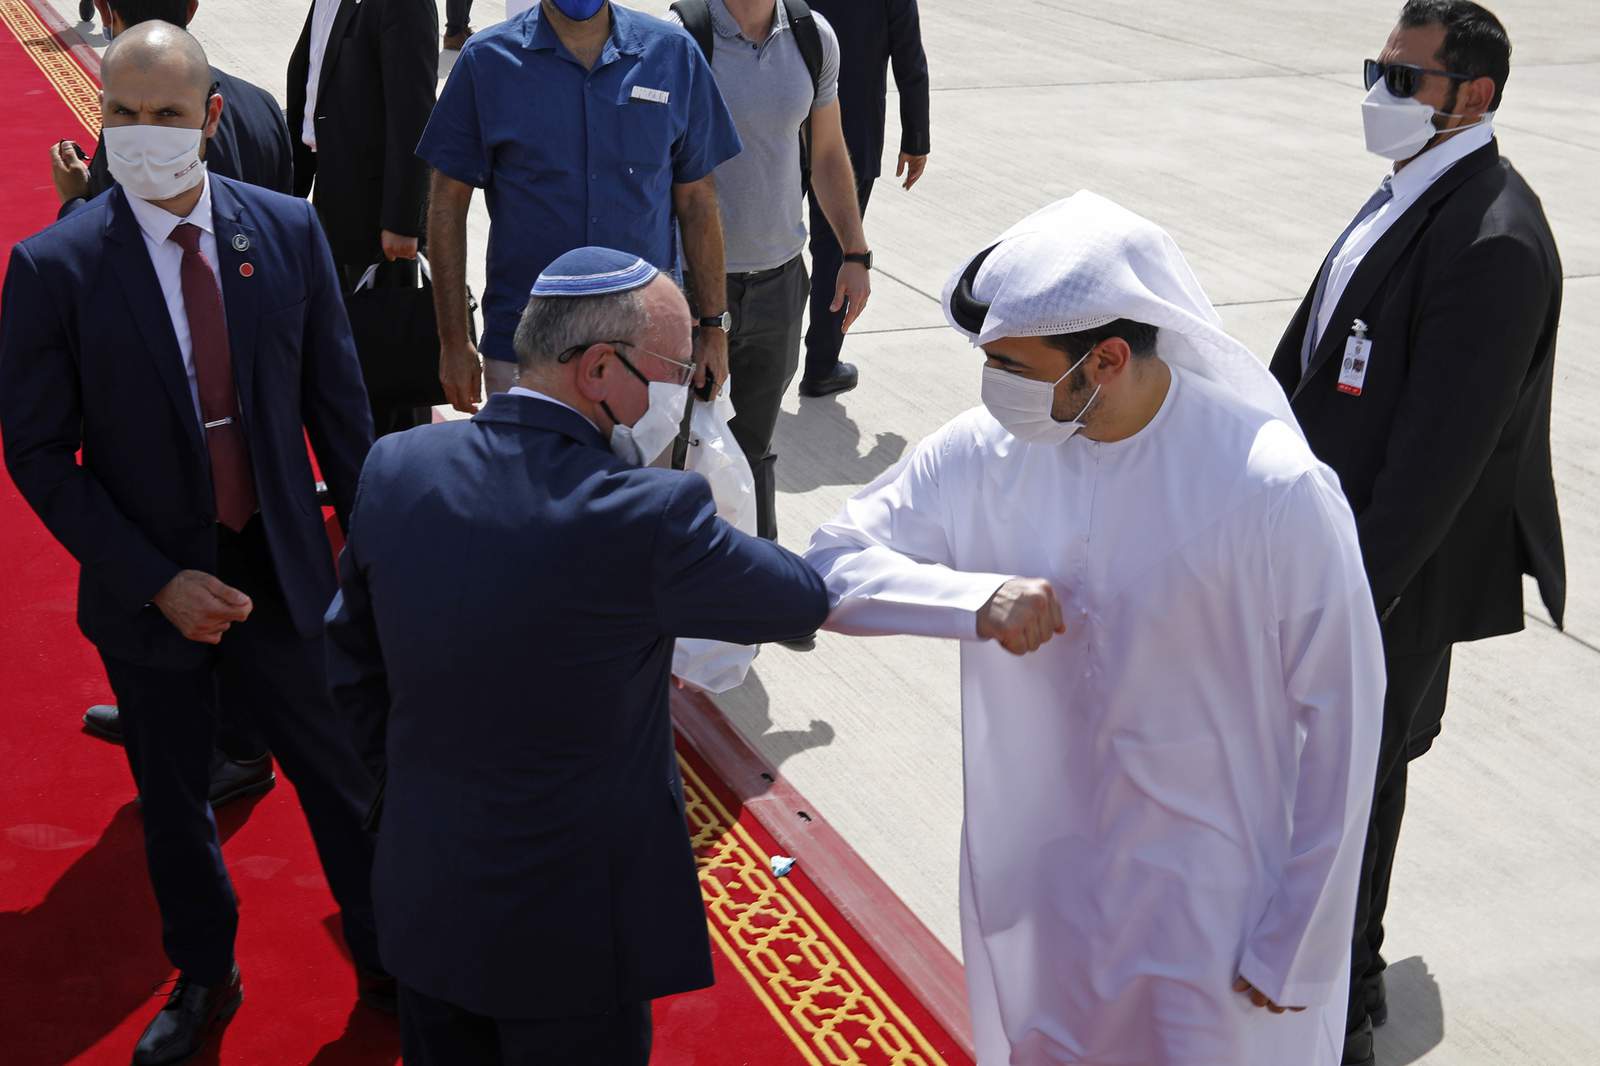 UAE's warm welcome to Israelis reflects changing region